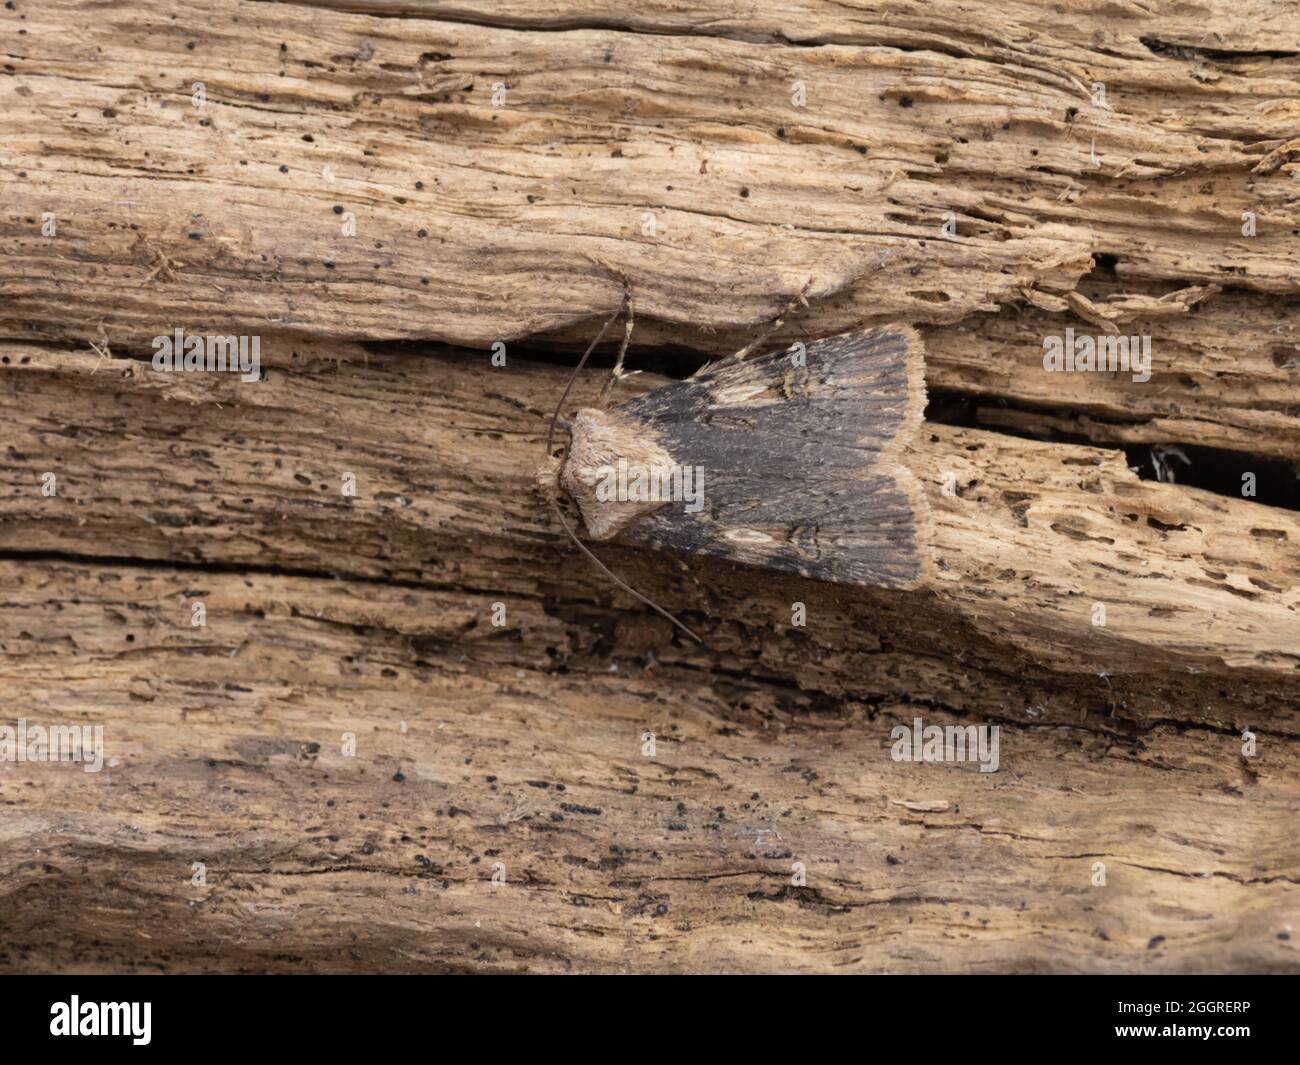 Agrotis puta, the Shuttle-shaped Dart, perched on a log. Stock Photo